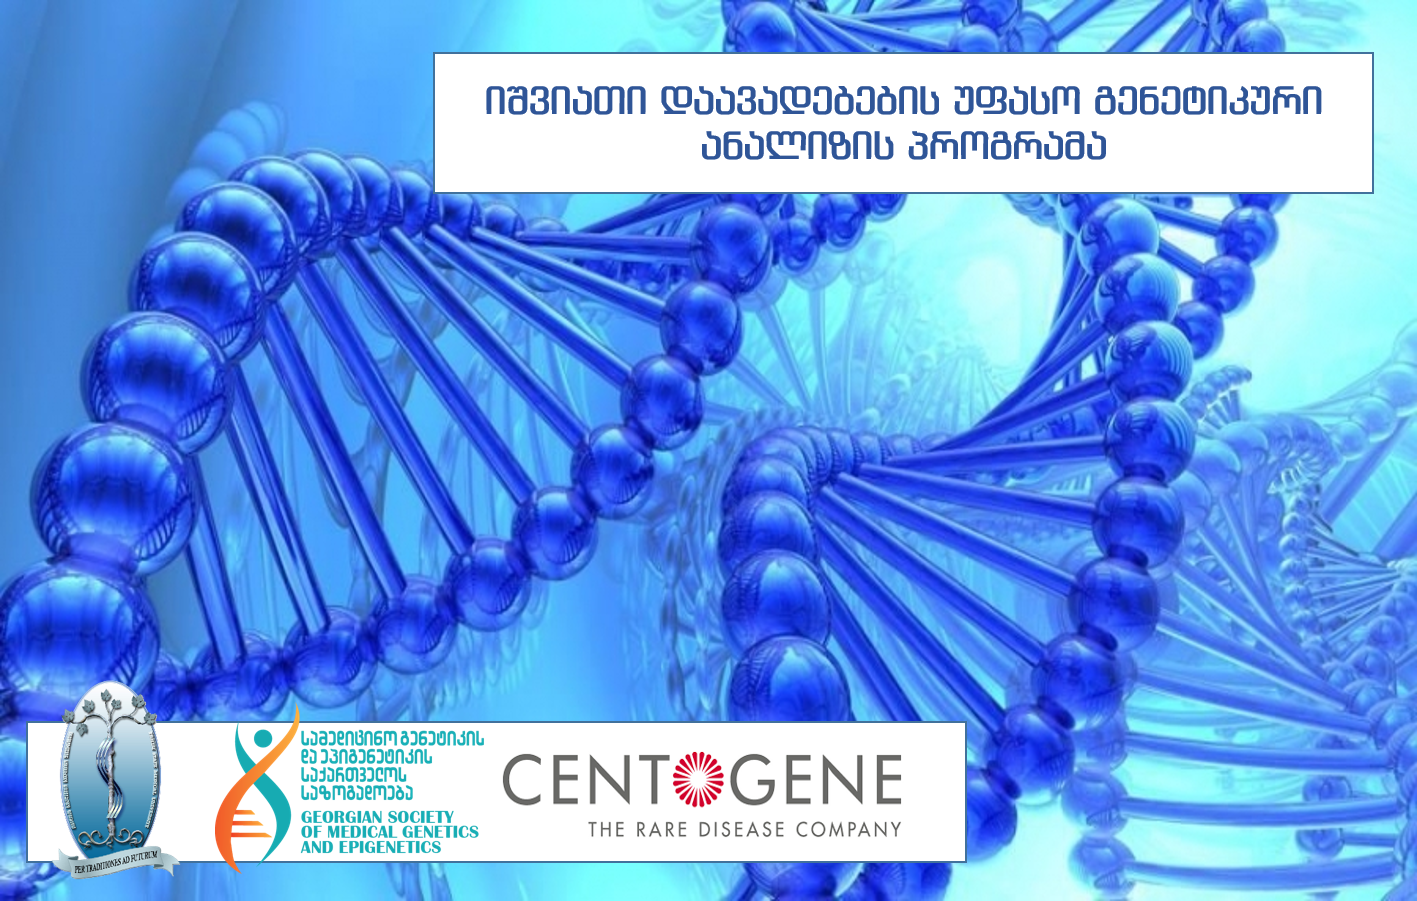 G. Zhvania Pediatric Academic Clinic under TSMU announces free genetic analysis program for rare diseases (biomarkers clinical trial) image